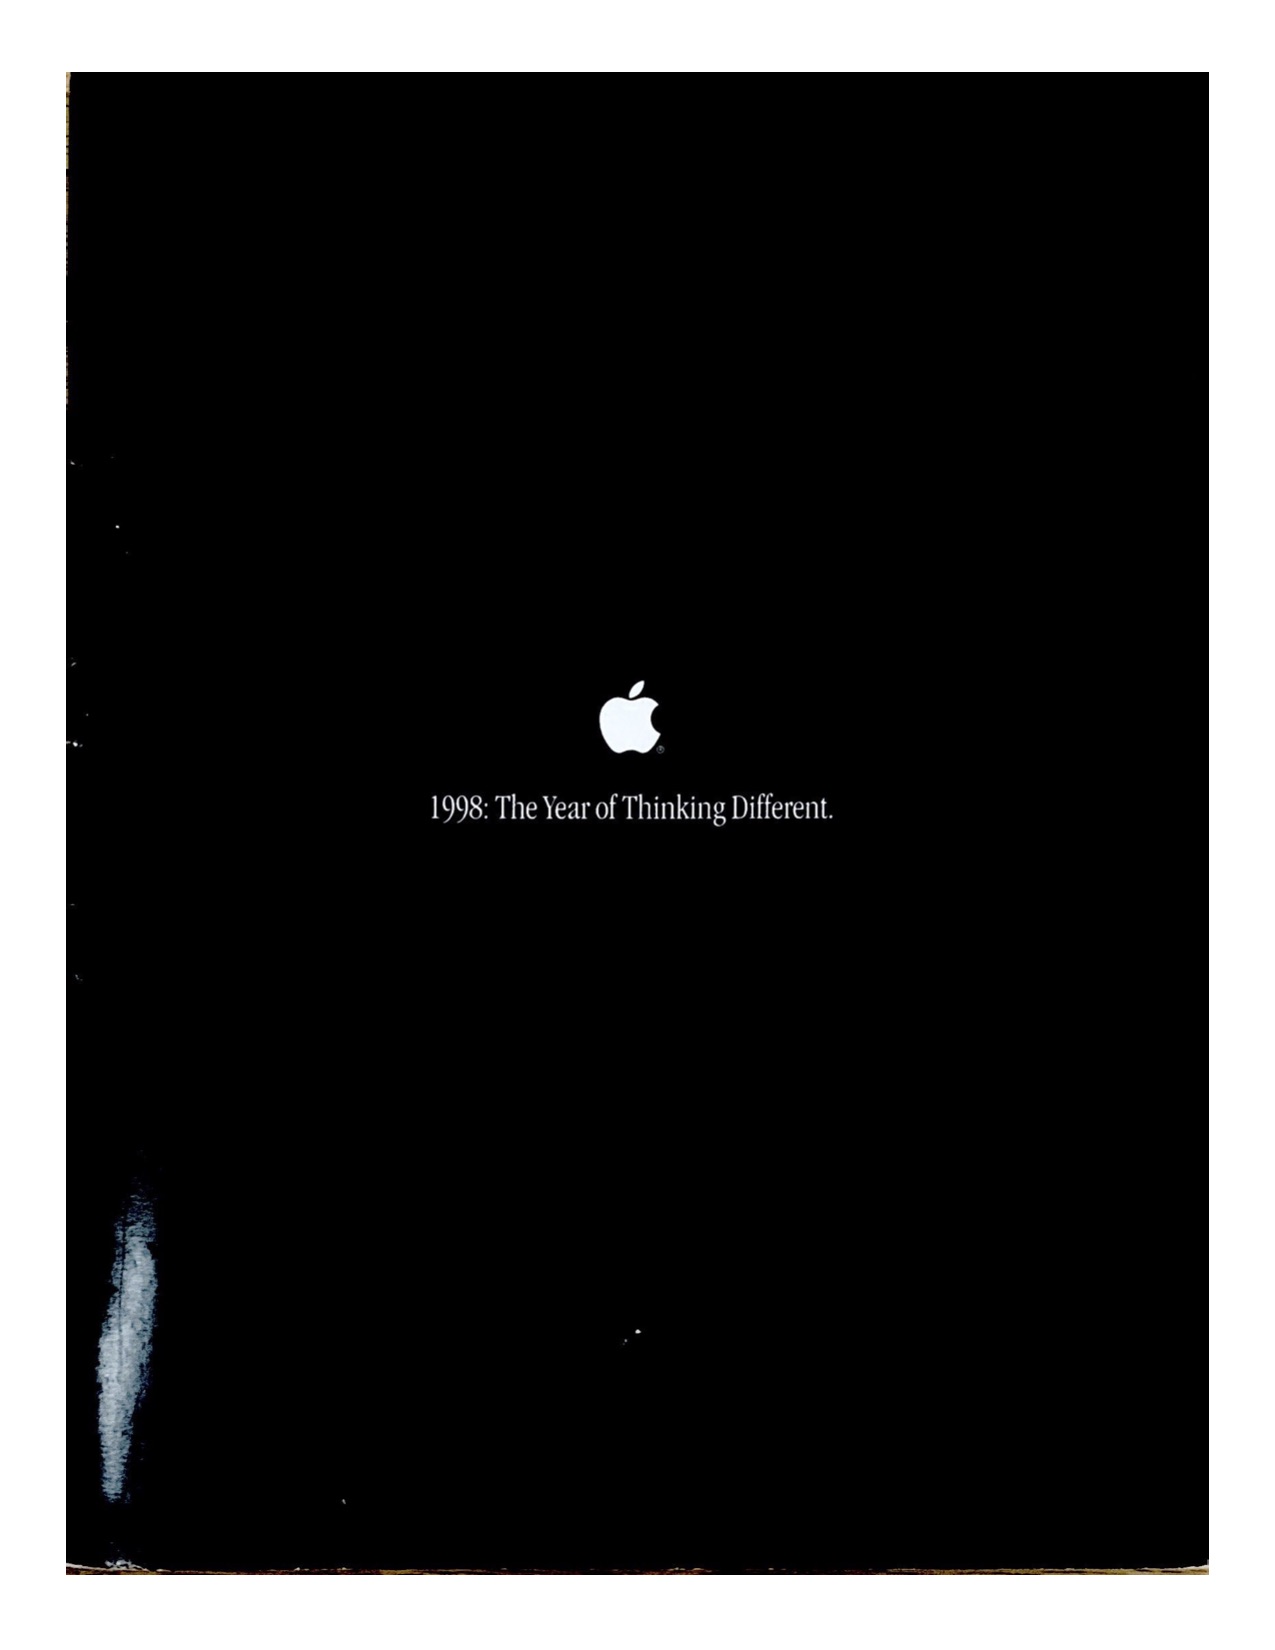 Think Different Book Opening-1.jpg